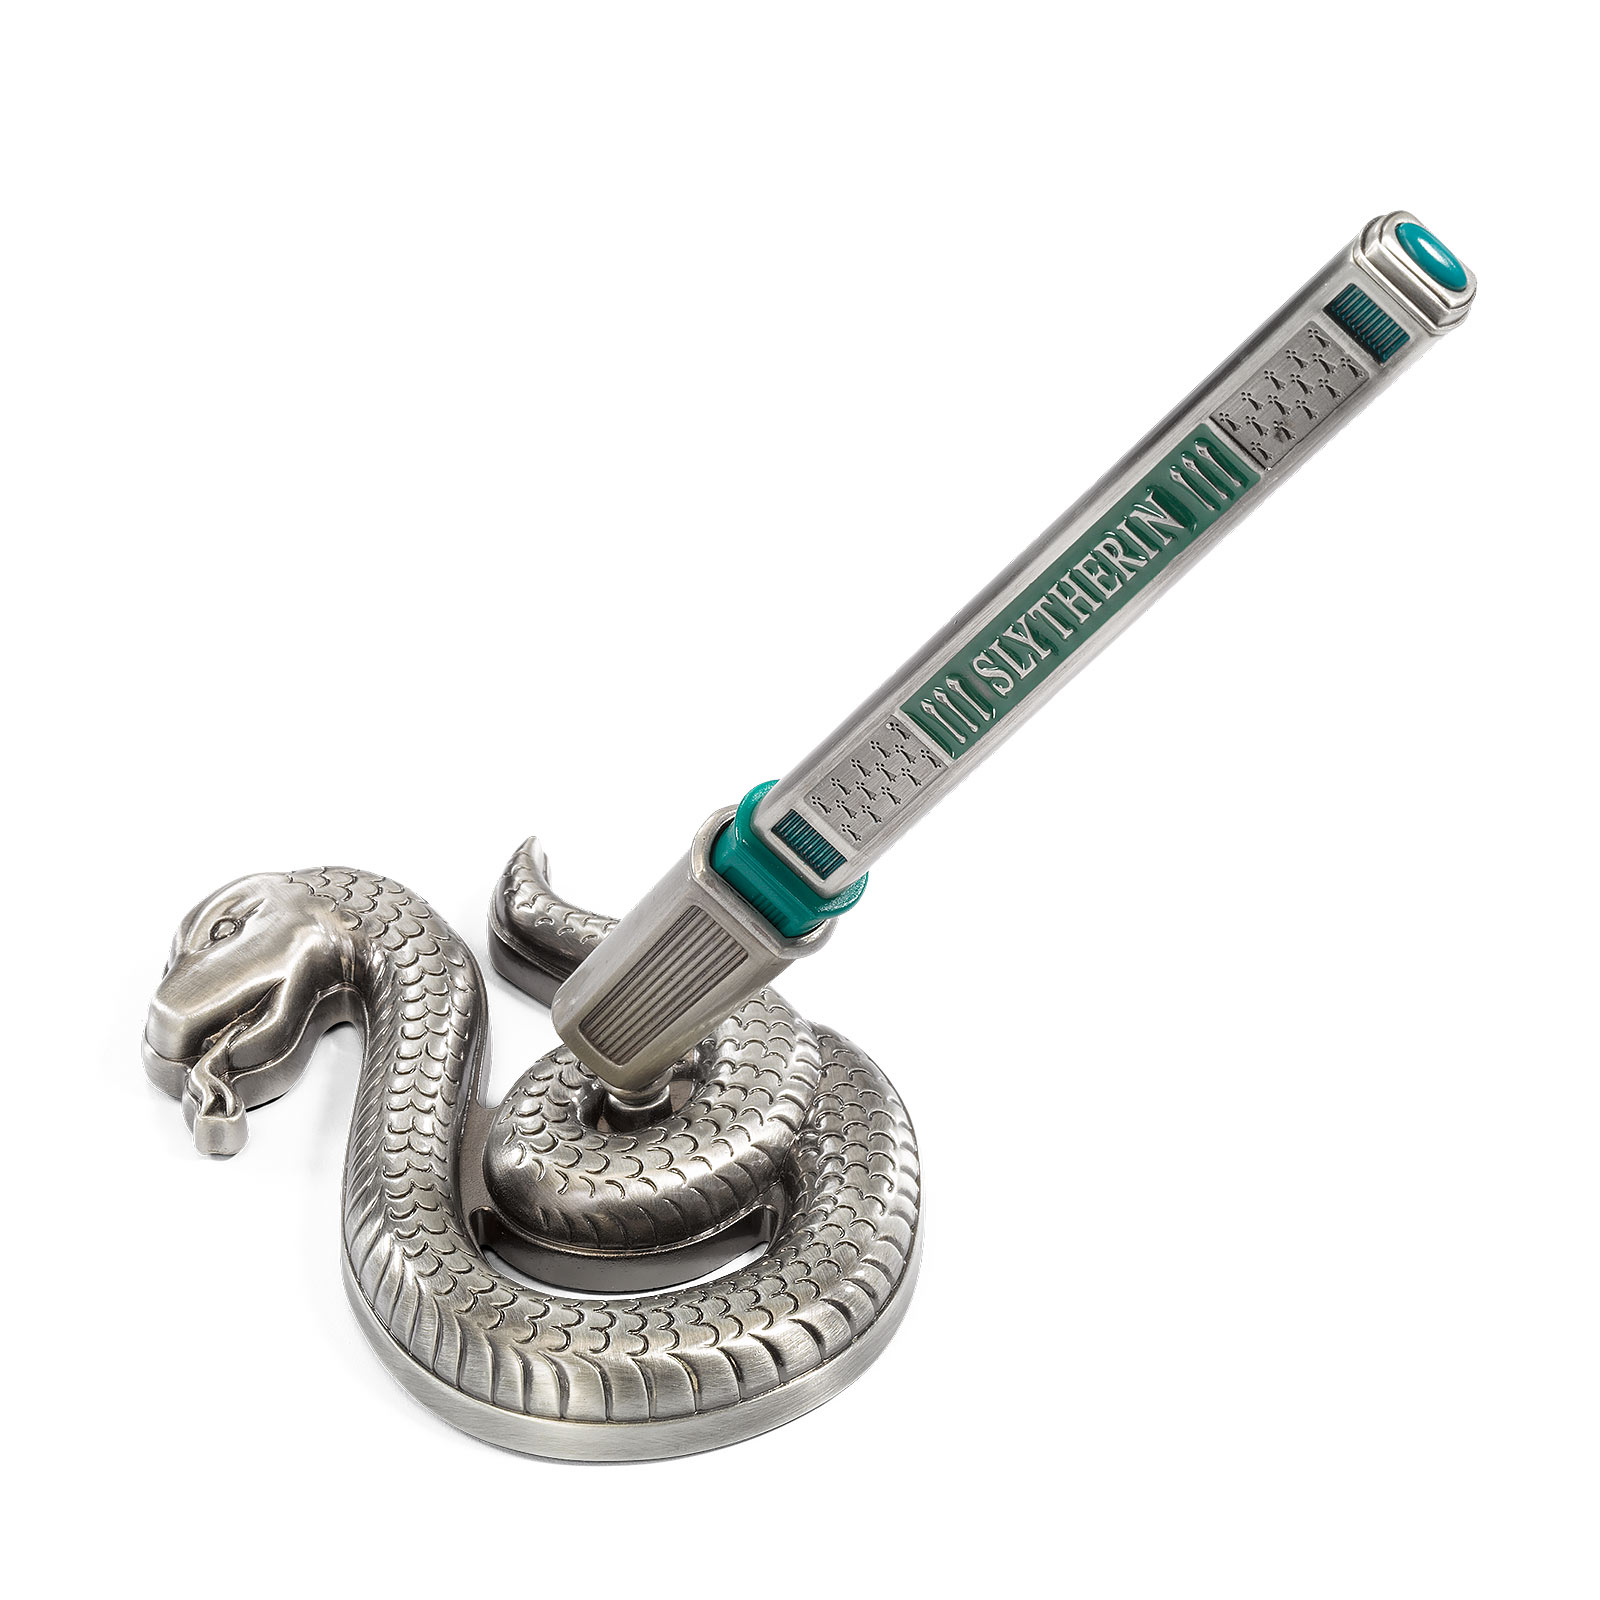 Slytherin - Harry Potter pen with stand